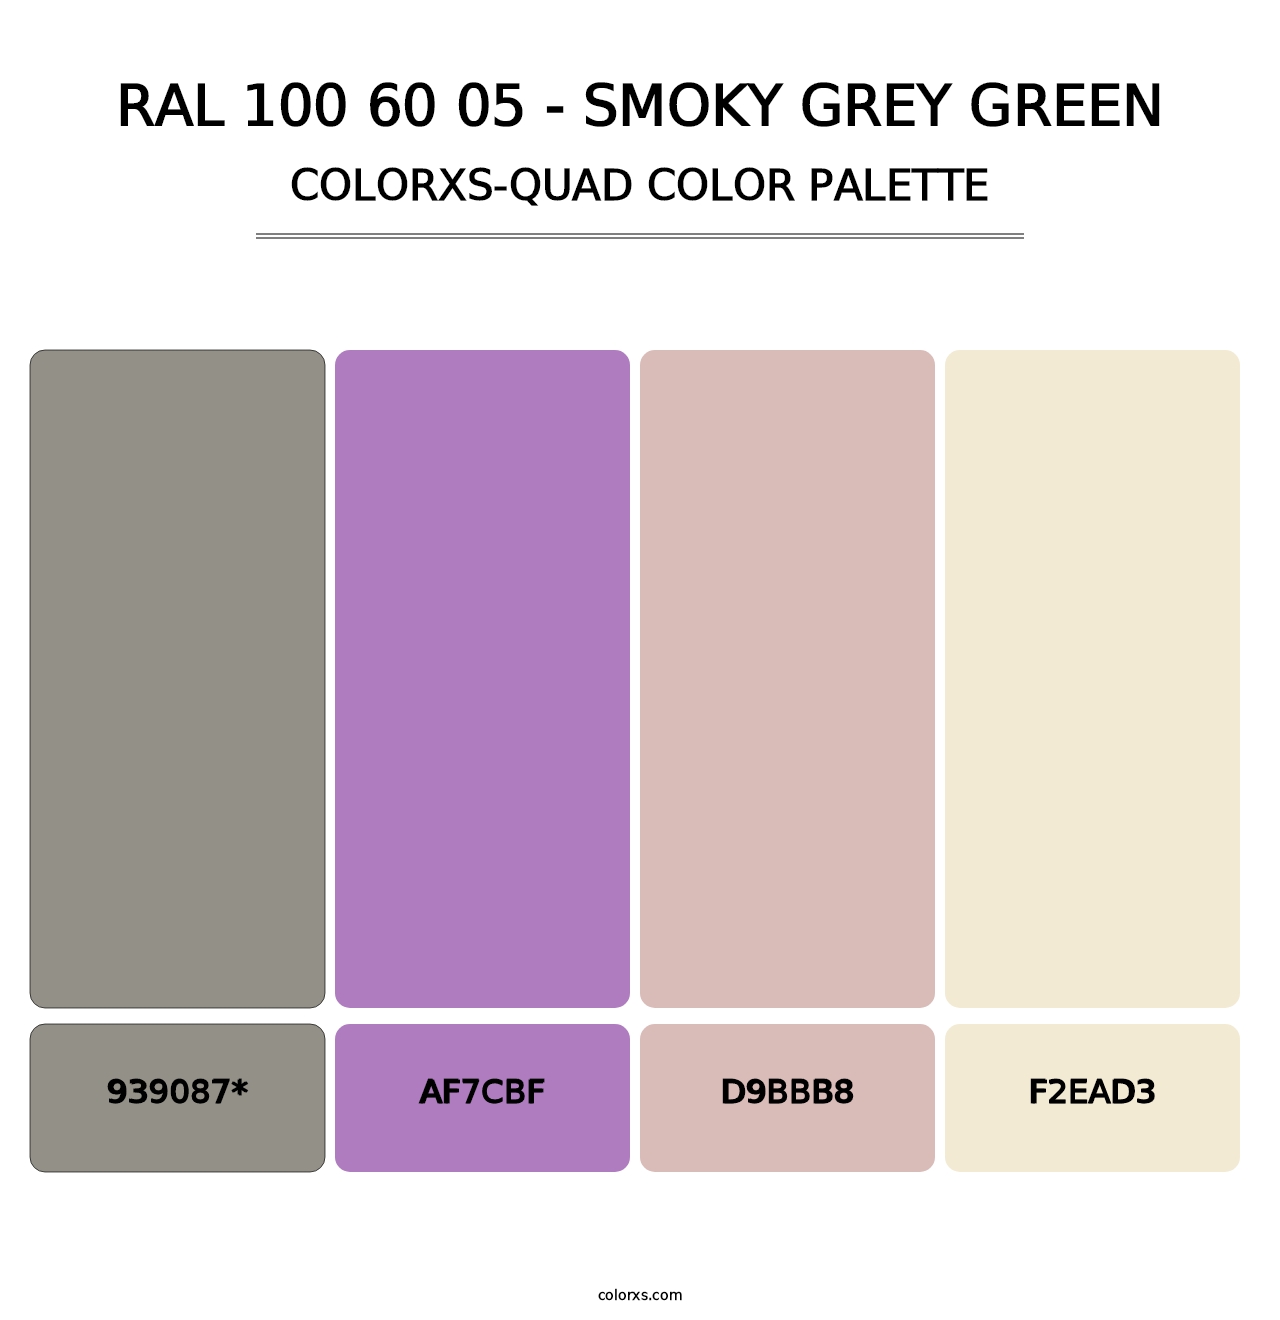 RAL 100 60 05 - Smoky Grey Green - Colorxs Quad Palette